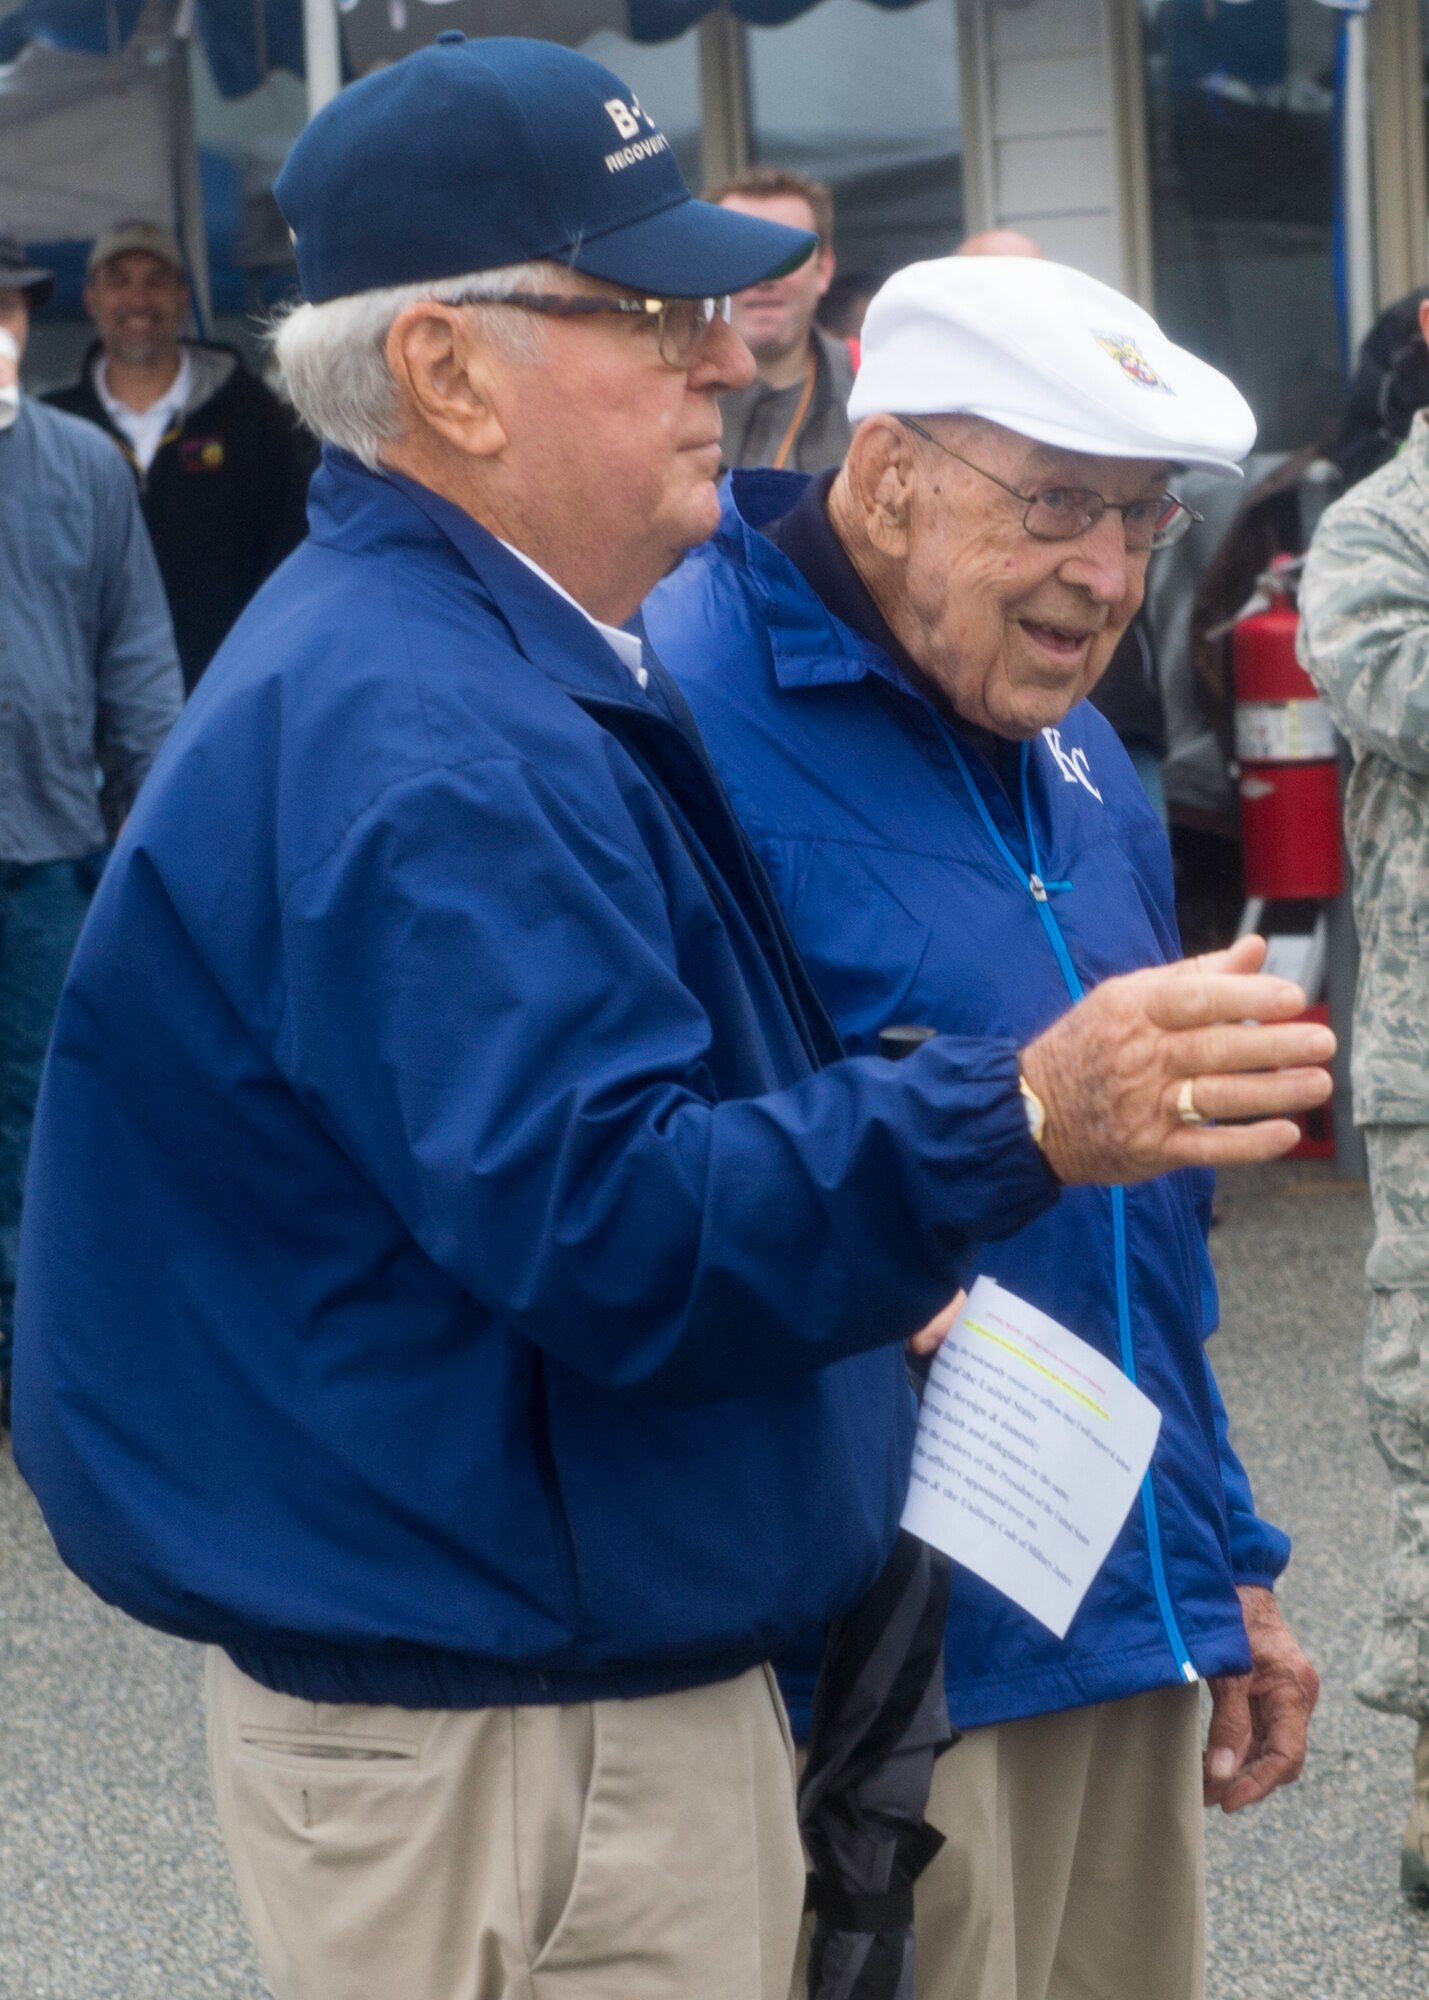 Ret. Lt. Col. Richard “Dick” Cole, last surviving Doolittle Raider, smiles after completing the Oath of Enlistment to Airmen joining the Air Force Reserve and other Airmen reenlisting in the Air Force during the Wings and Wheels event Oct. 1, 2016, Georgetown, Del. Cole was co-pilot to Lt. Col. James “Jimmy” Doolittle flying in the first North American B-25 Mitchell on a one-way mission to bomb Japan after the attack on Pearl Harbor. (U.S. Air Force Photo/ Tech. Sgt. Nathan Rivard)